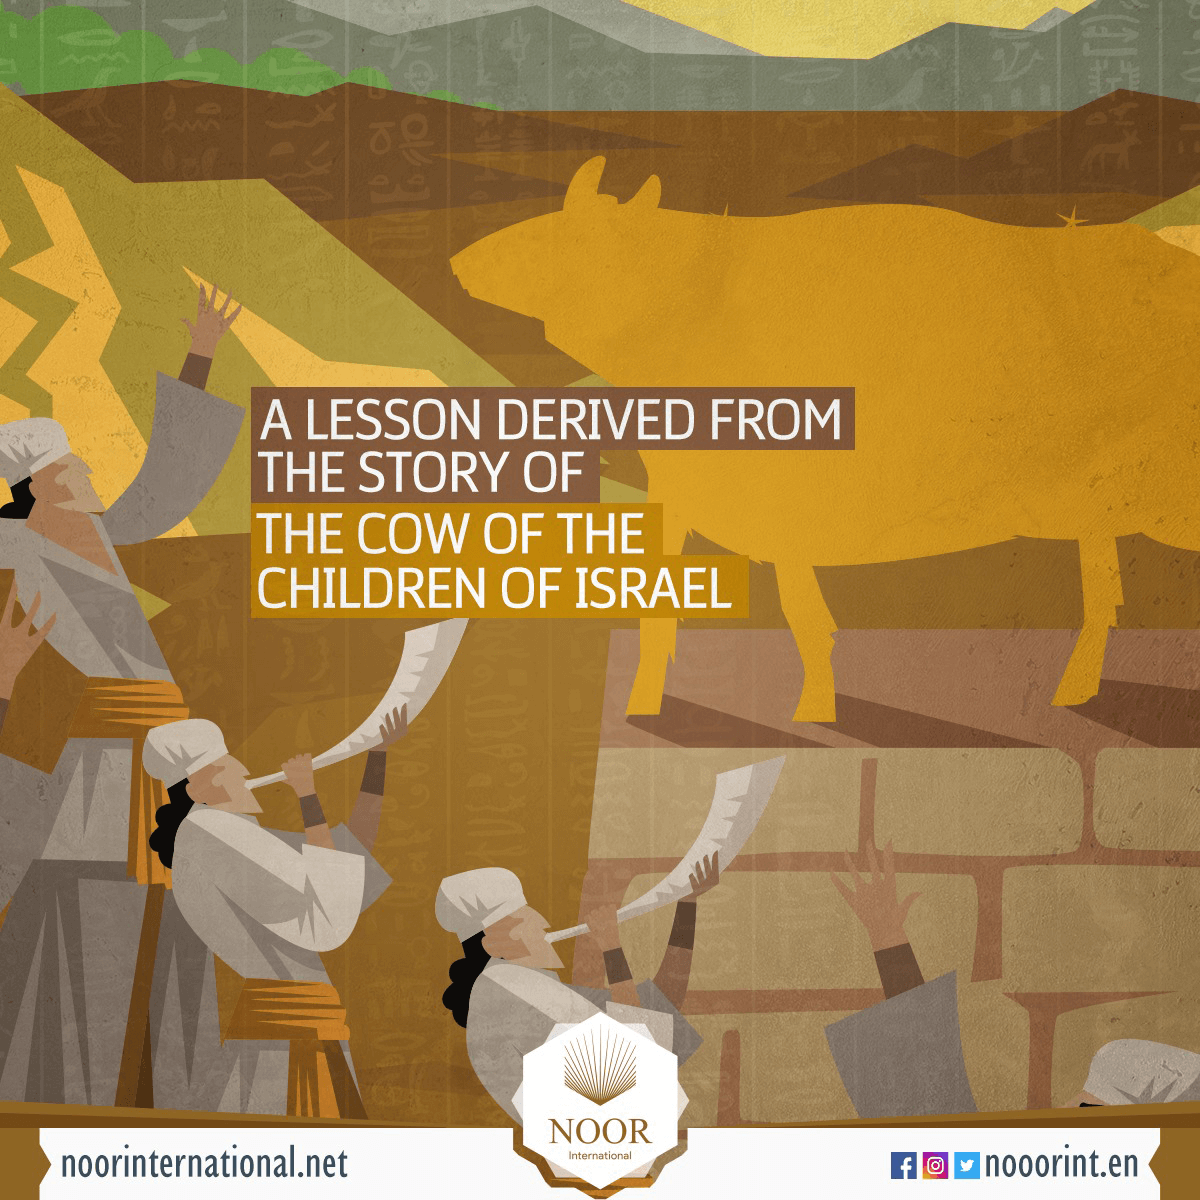 A lesson derived from the story of the cow of the children of Israel